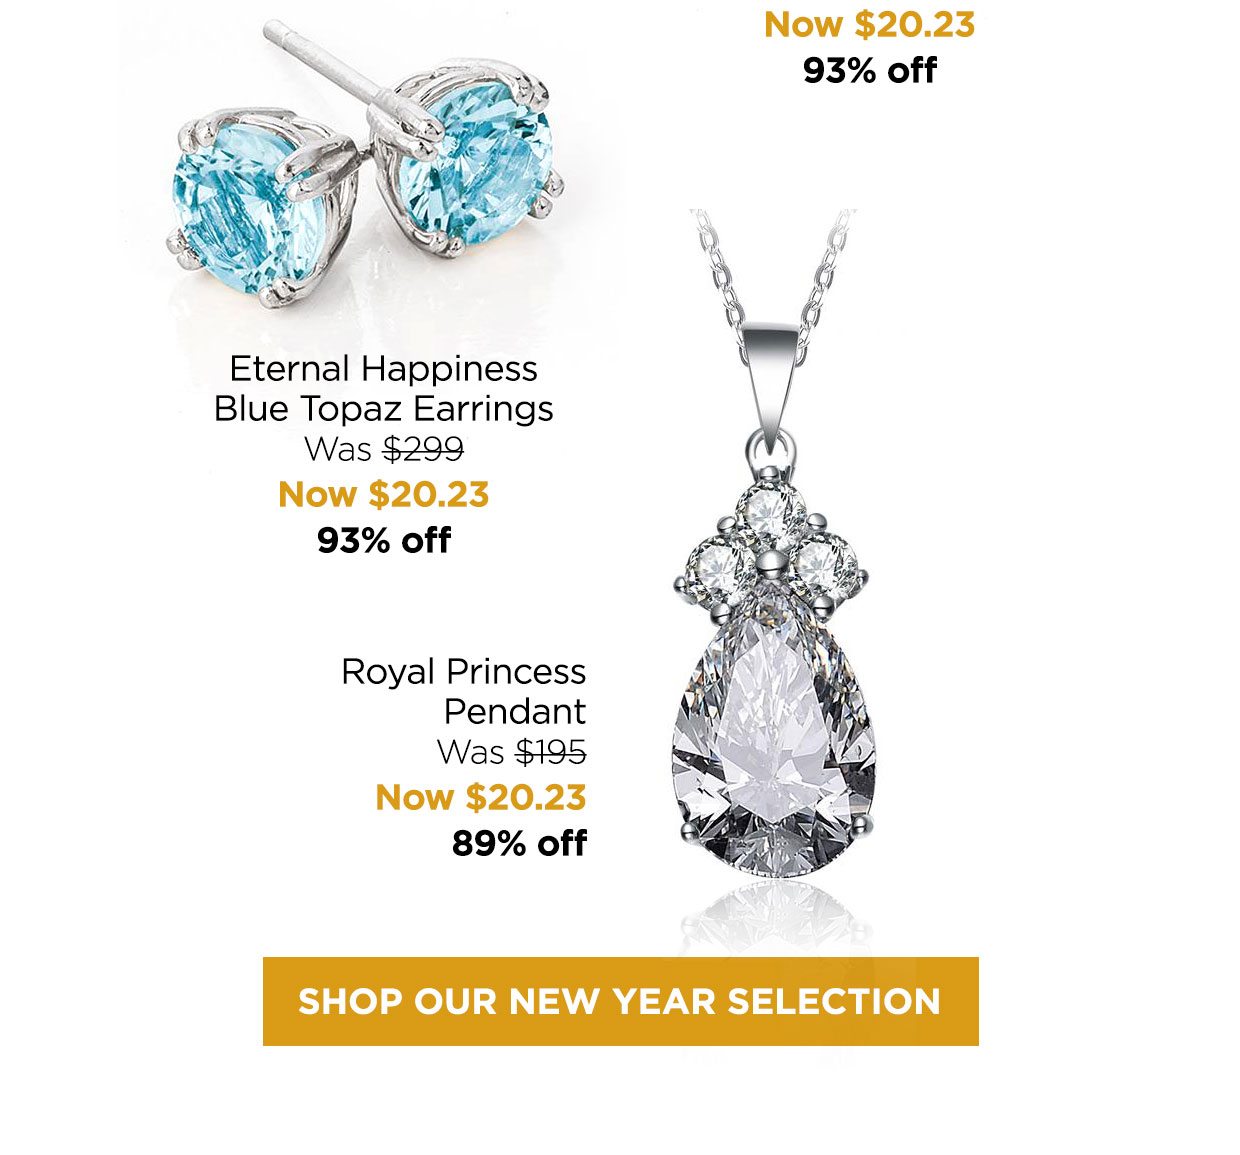 Now $20.23, 93% off. Eternal Happiness Blue Topaz Earrings Was $299, Now $20.23, 93% off. Royal Princess Pendant, Was $195, Now $20.23, 89% off. Shop Our New Year Selection